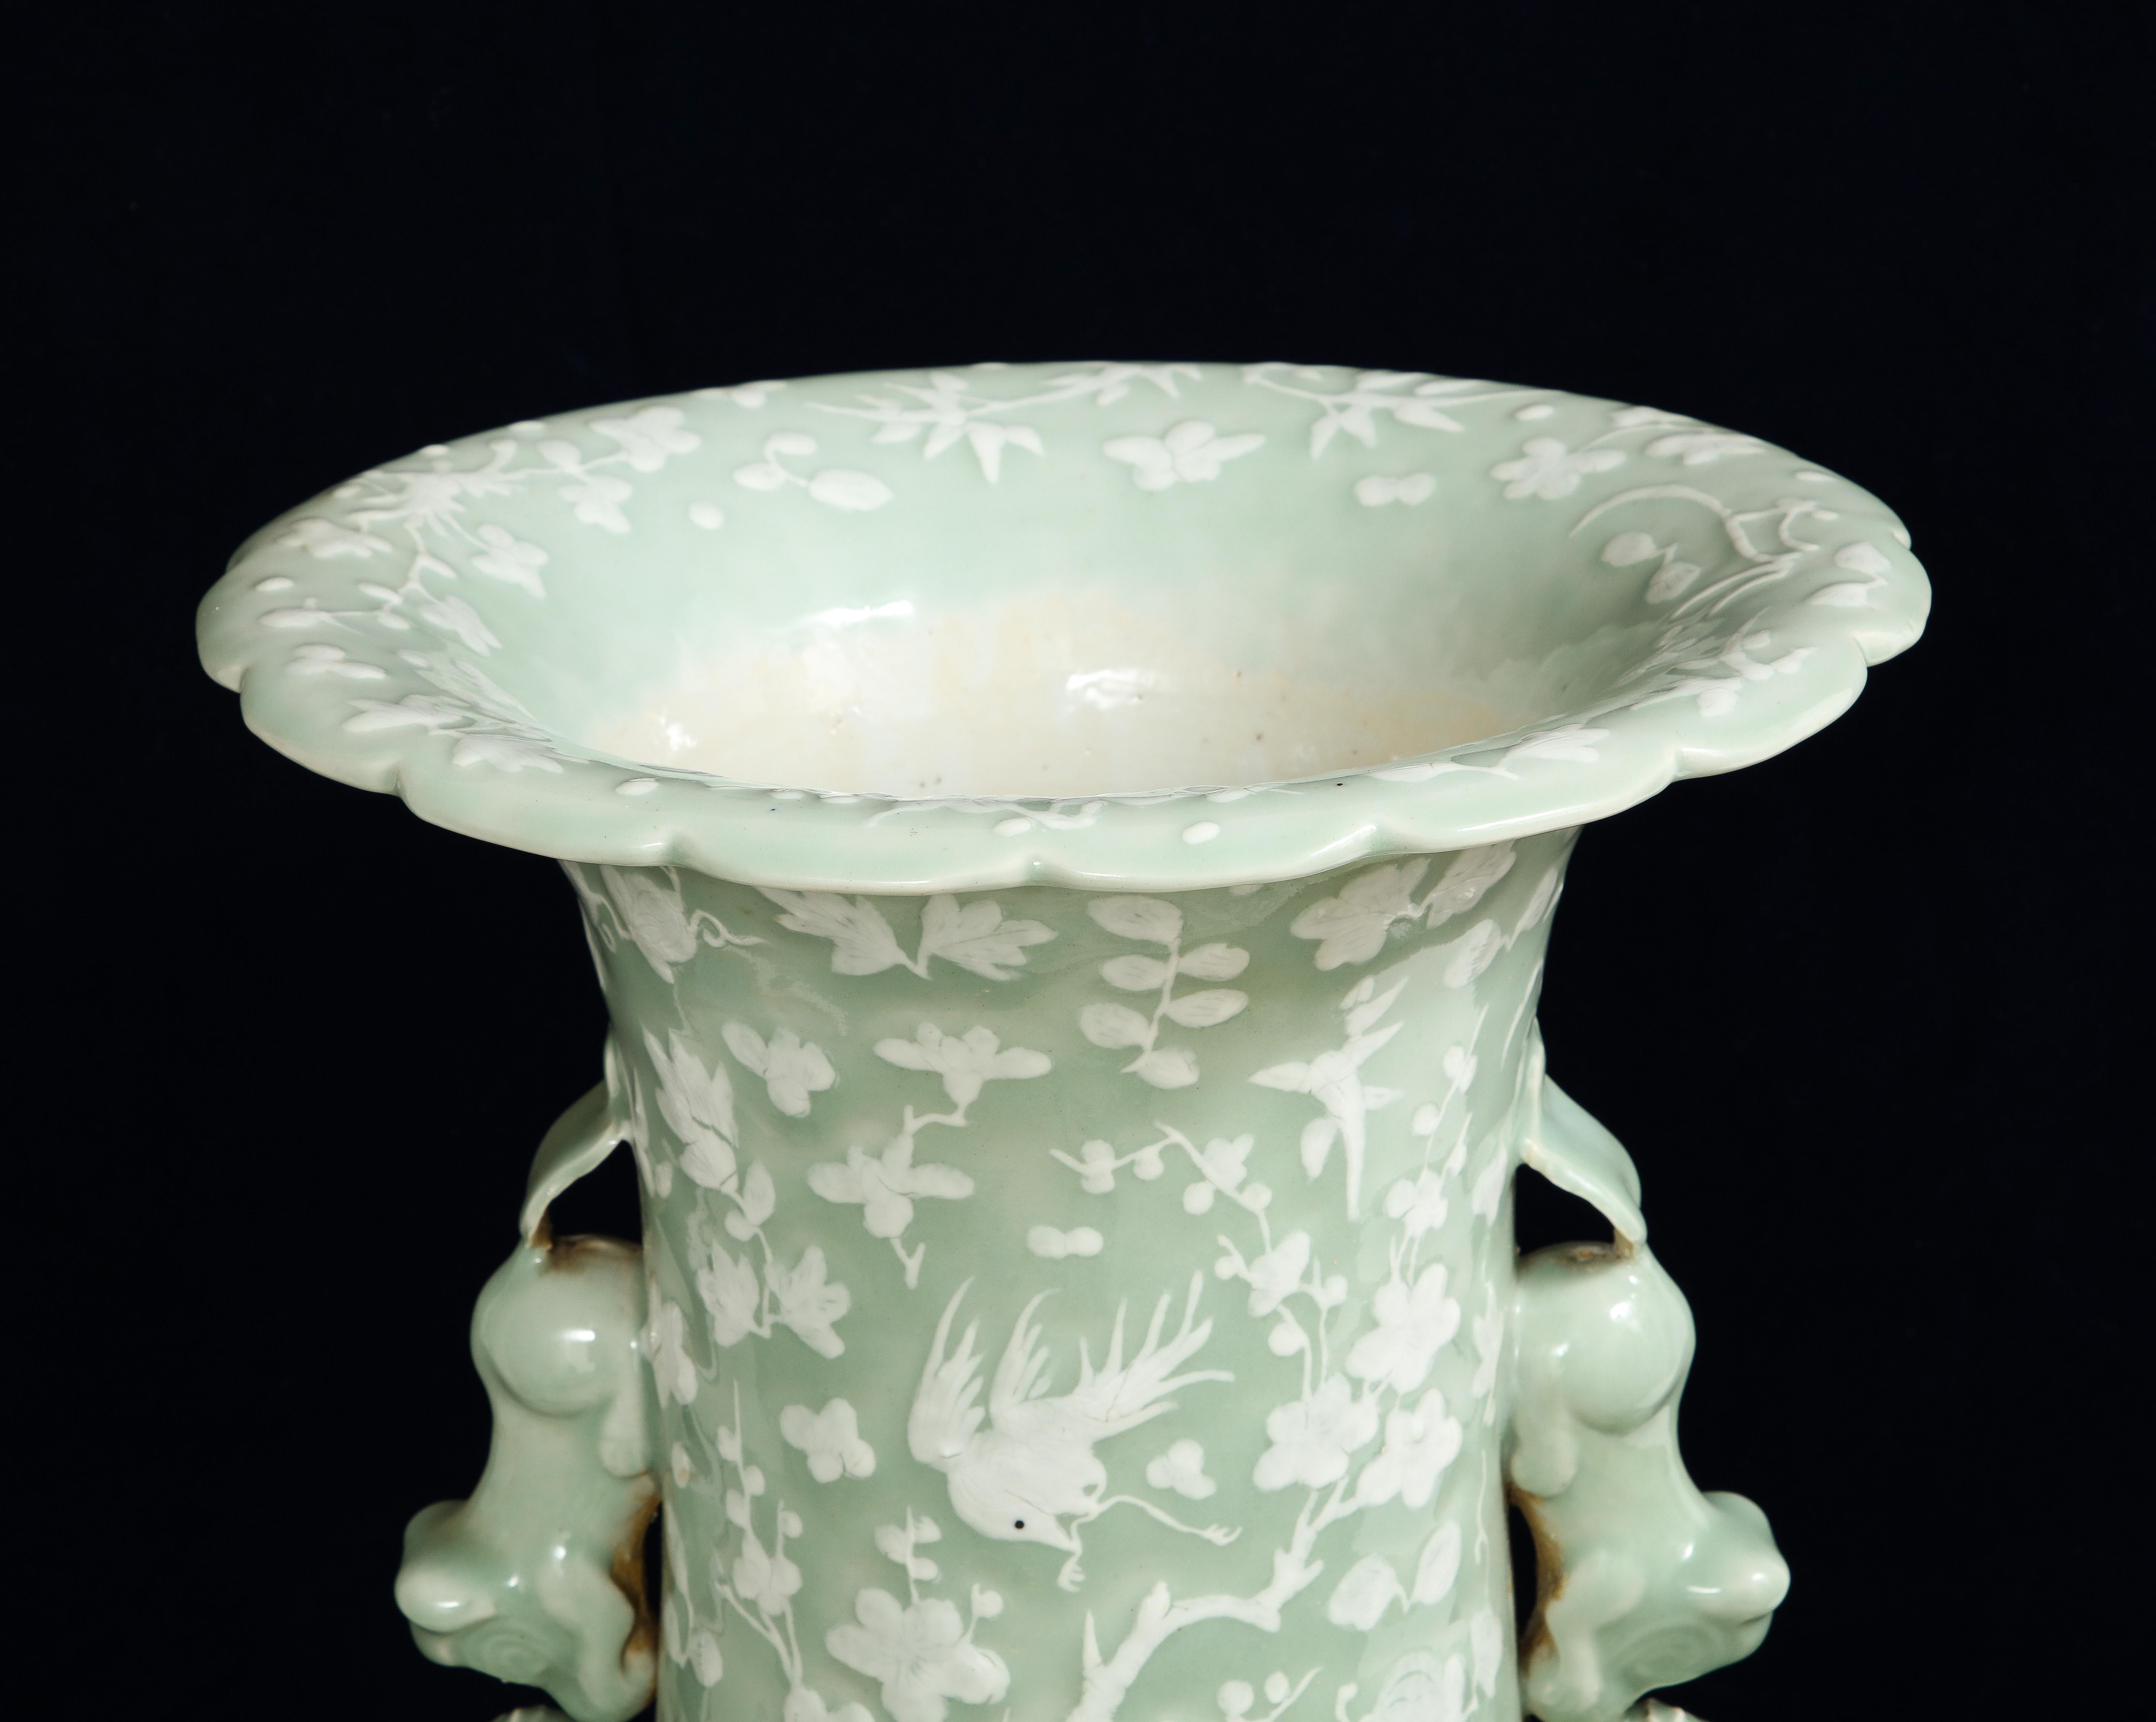 Large 19th C. Chinese Celadon-Ground Slip-Decorated Vase W/ Foo Dog Handles For Sale 11